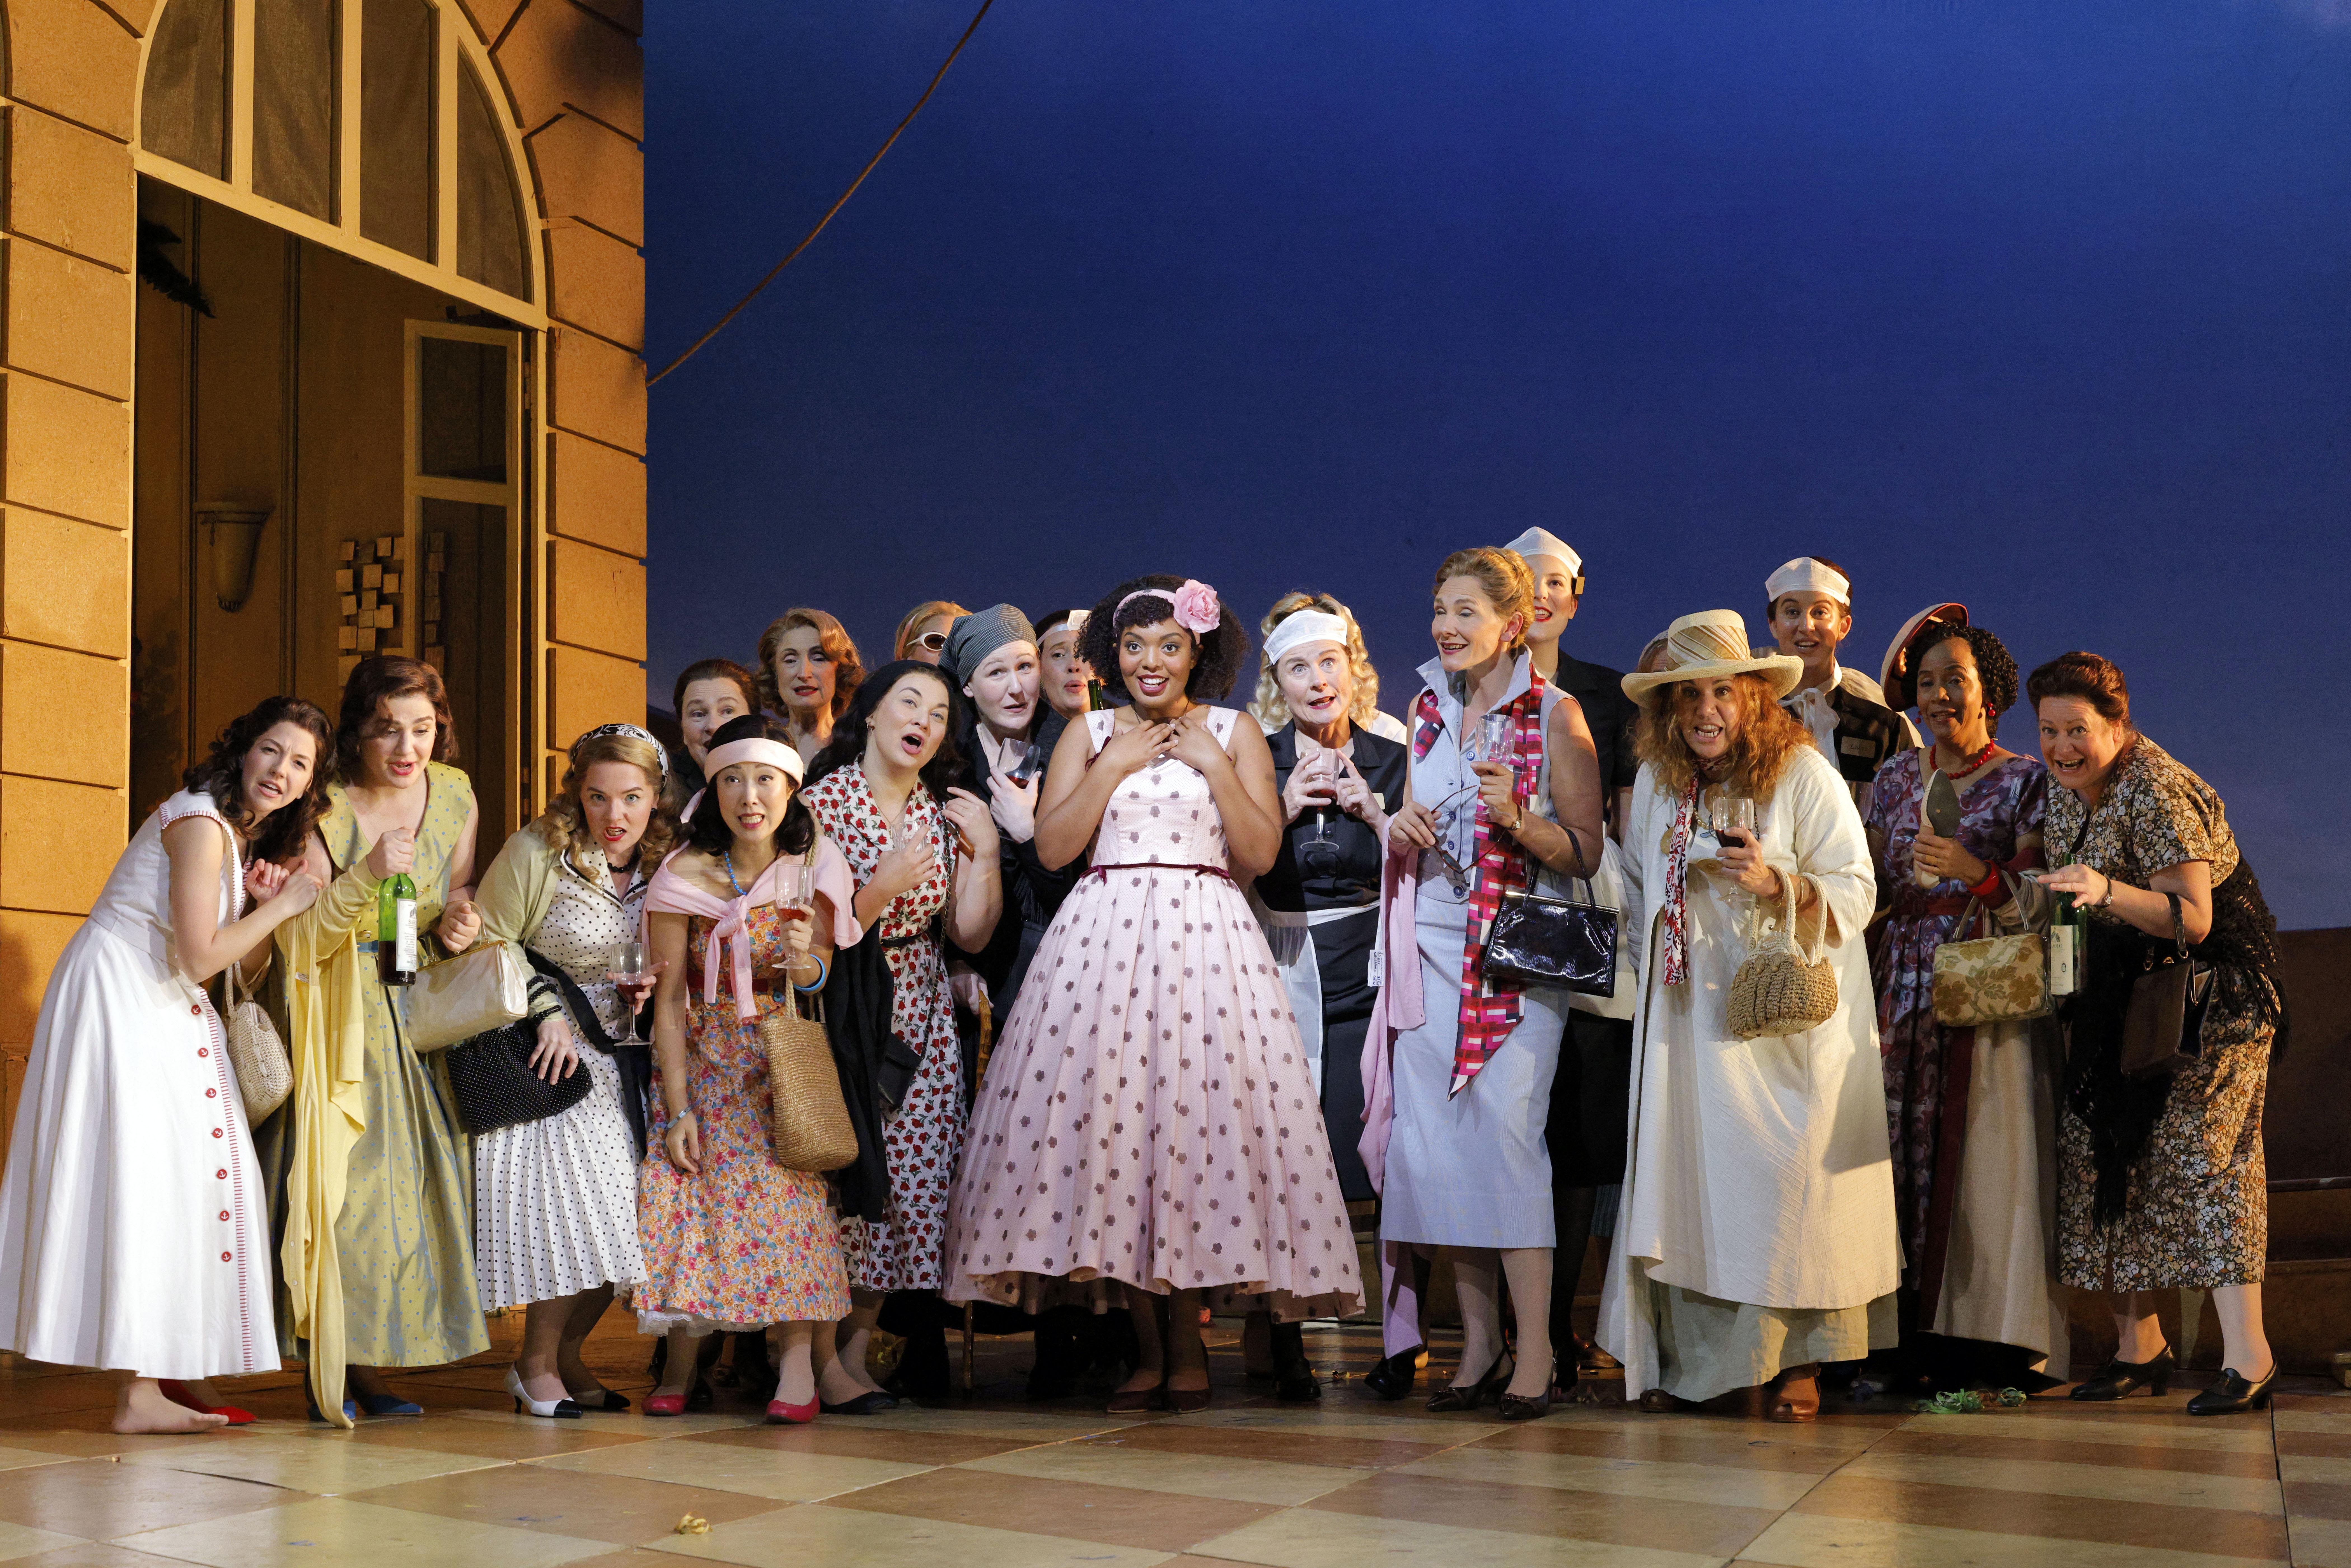  Second-year Adler Fellow, Arianna Rodriguez as Gianetta in L’elisir d’amore with members of the San Francisco Opera chorus.